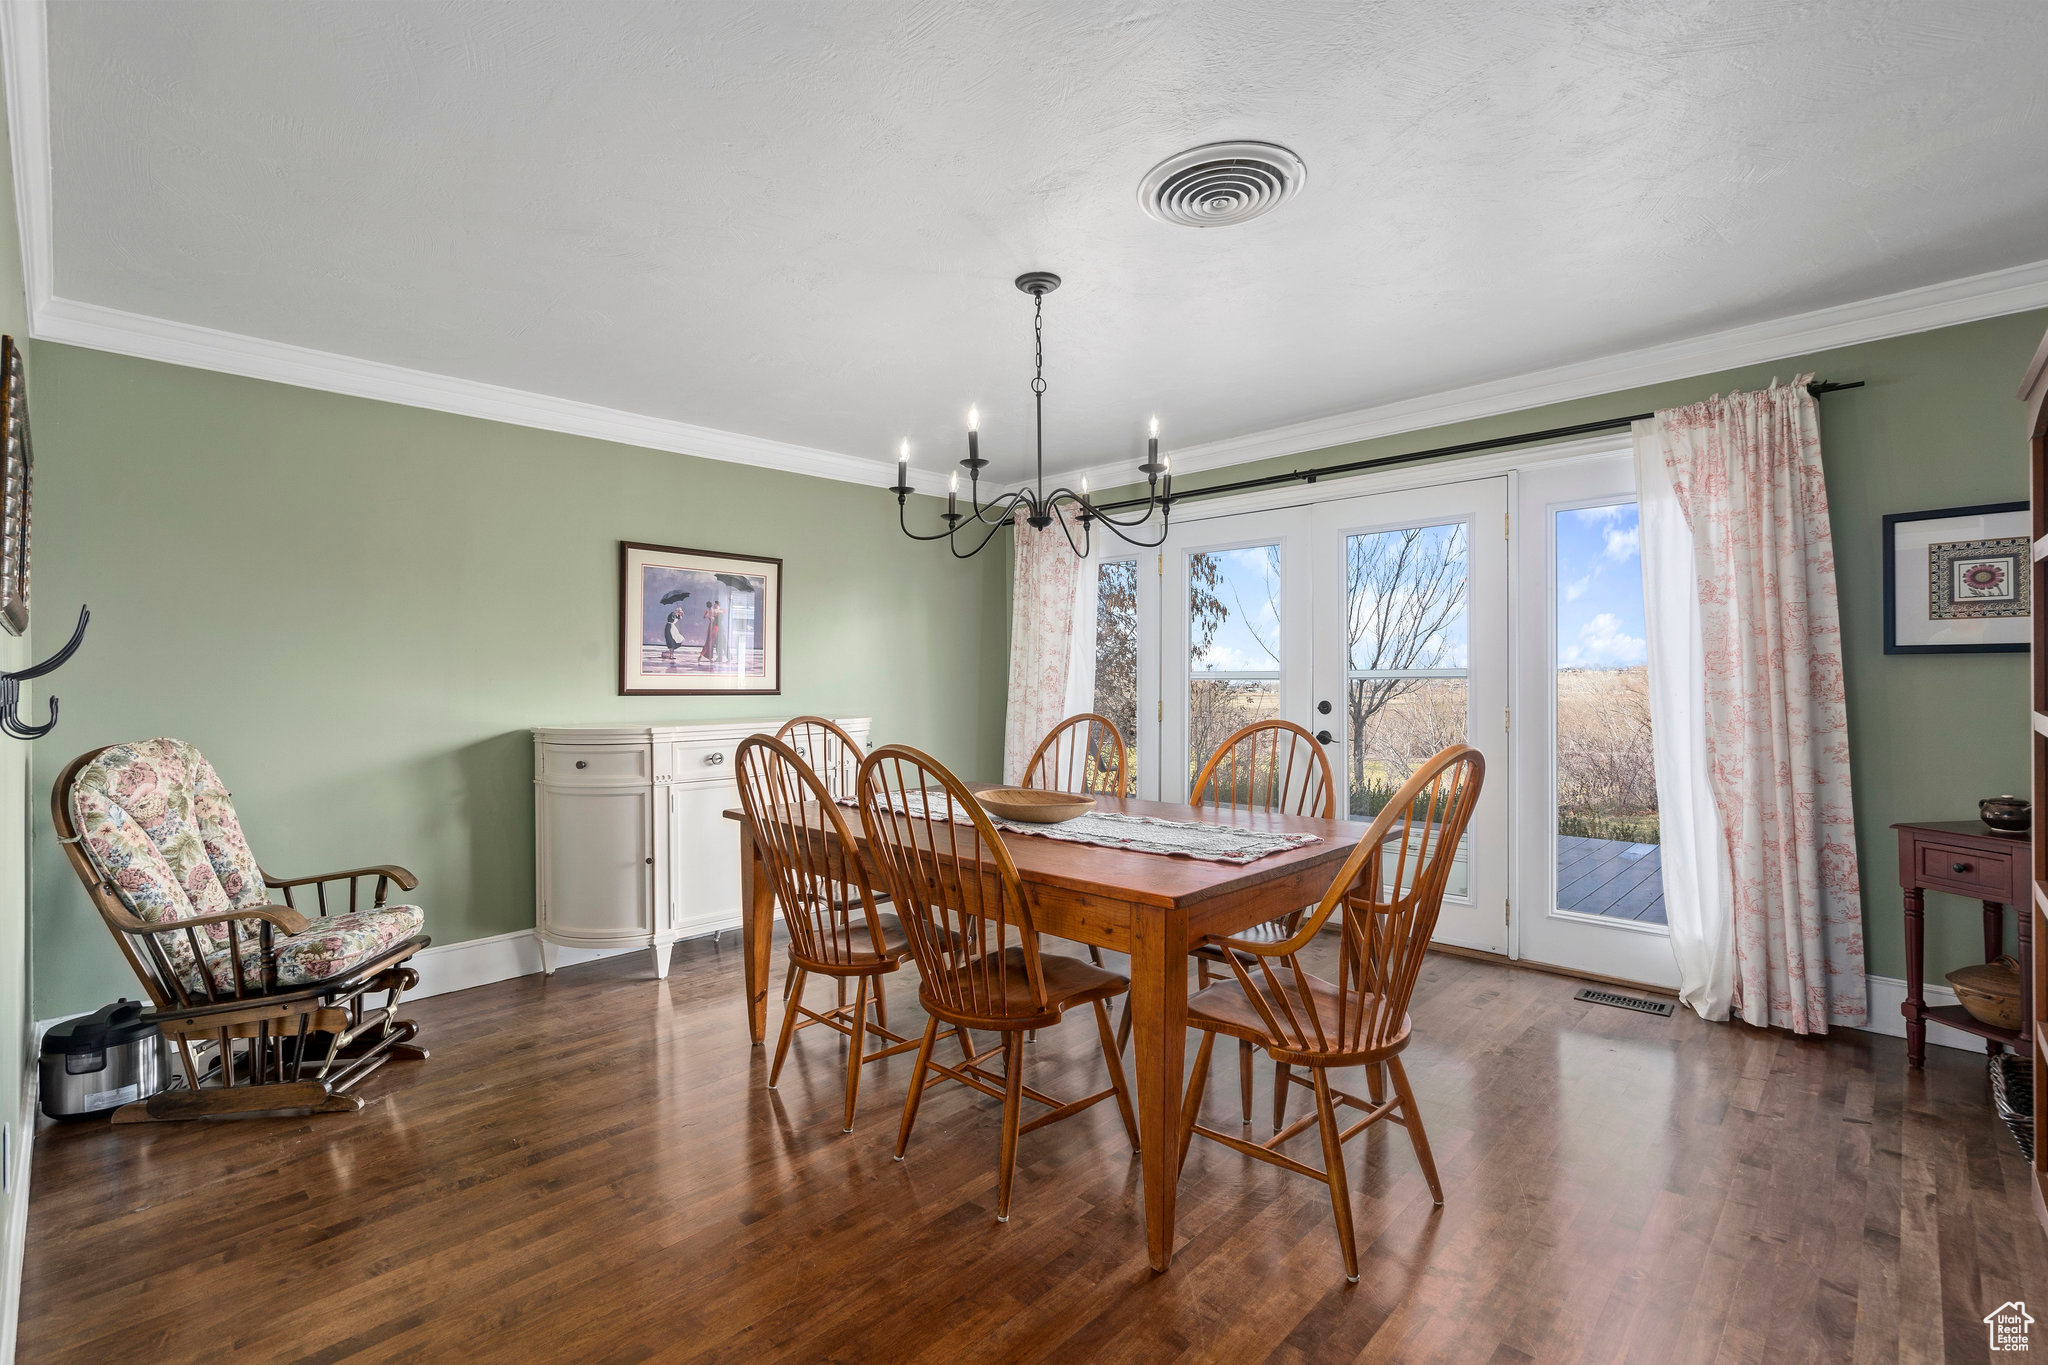 Dining space with dark hardwood / wood-style floors, an inviting chandelier, and crown molding. French doors that open to Trex deck overlooking the riverbottoms to the north.